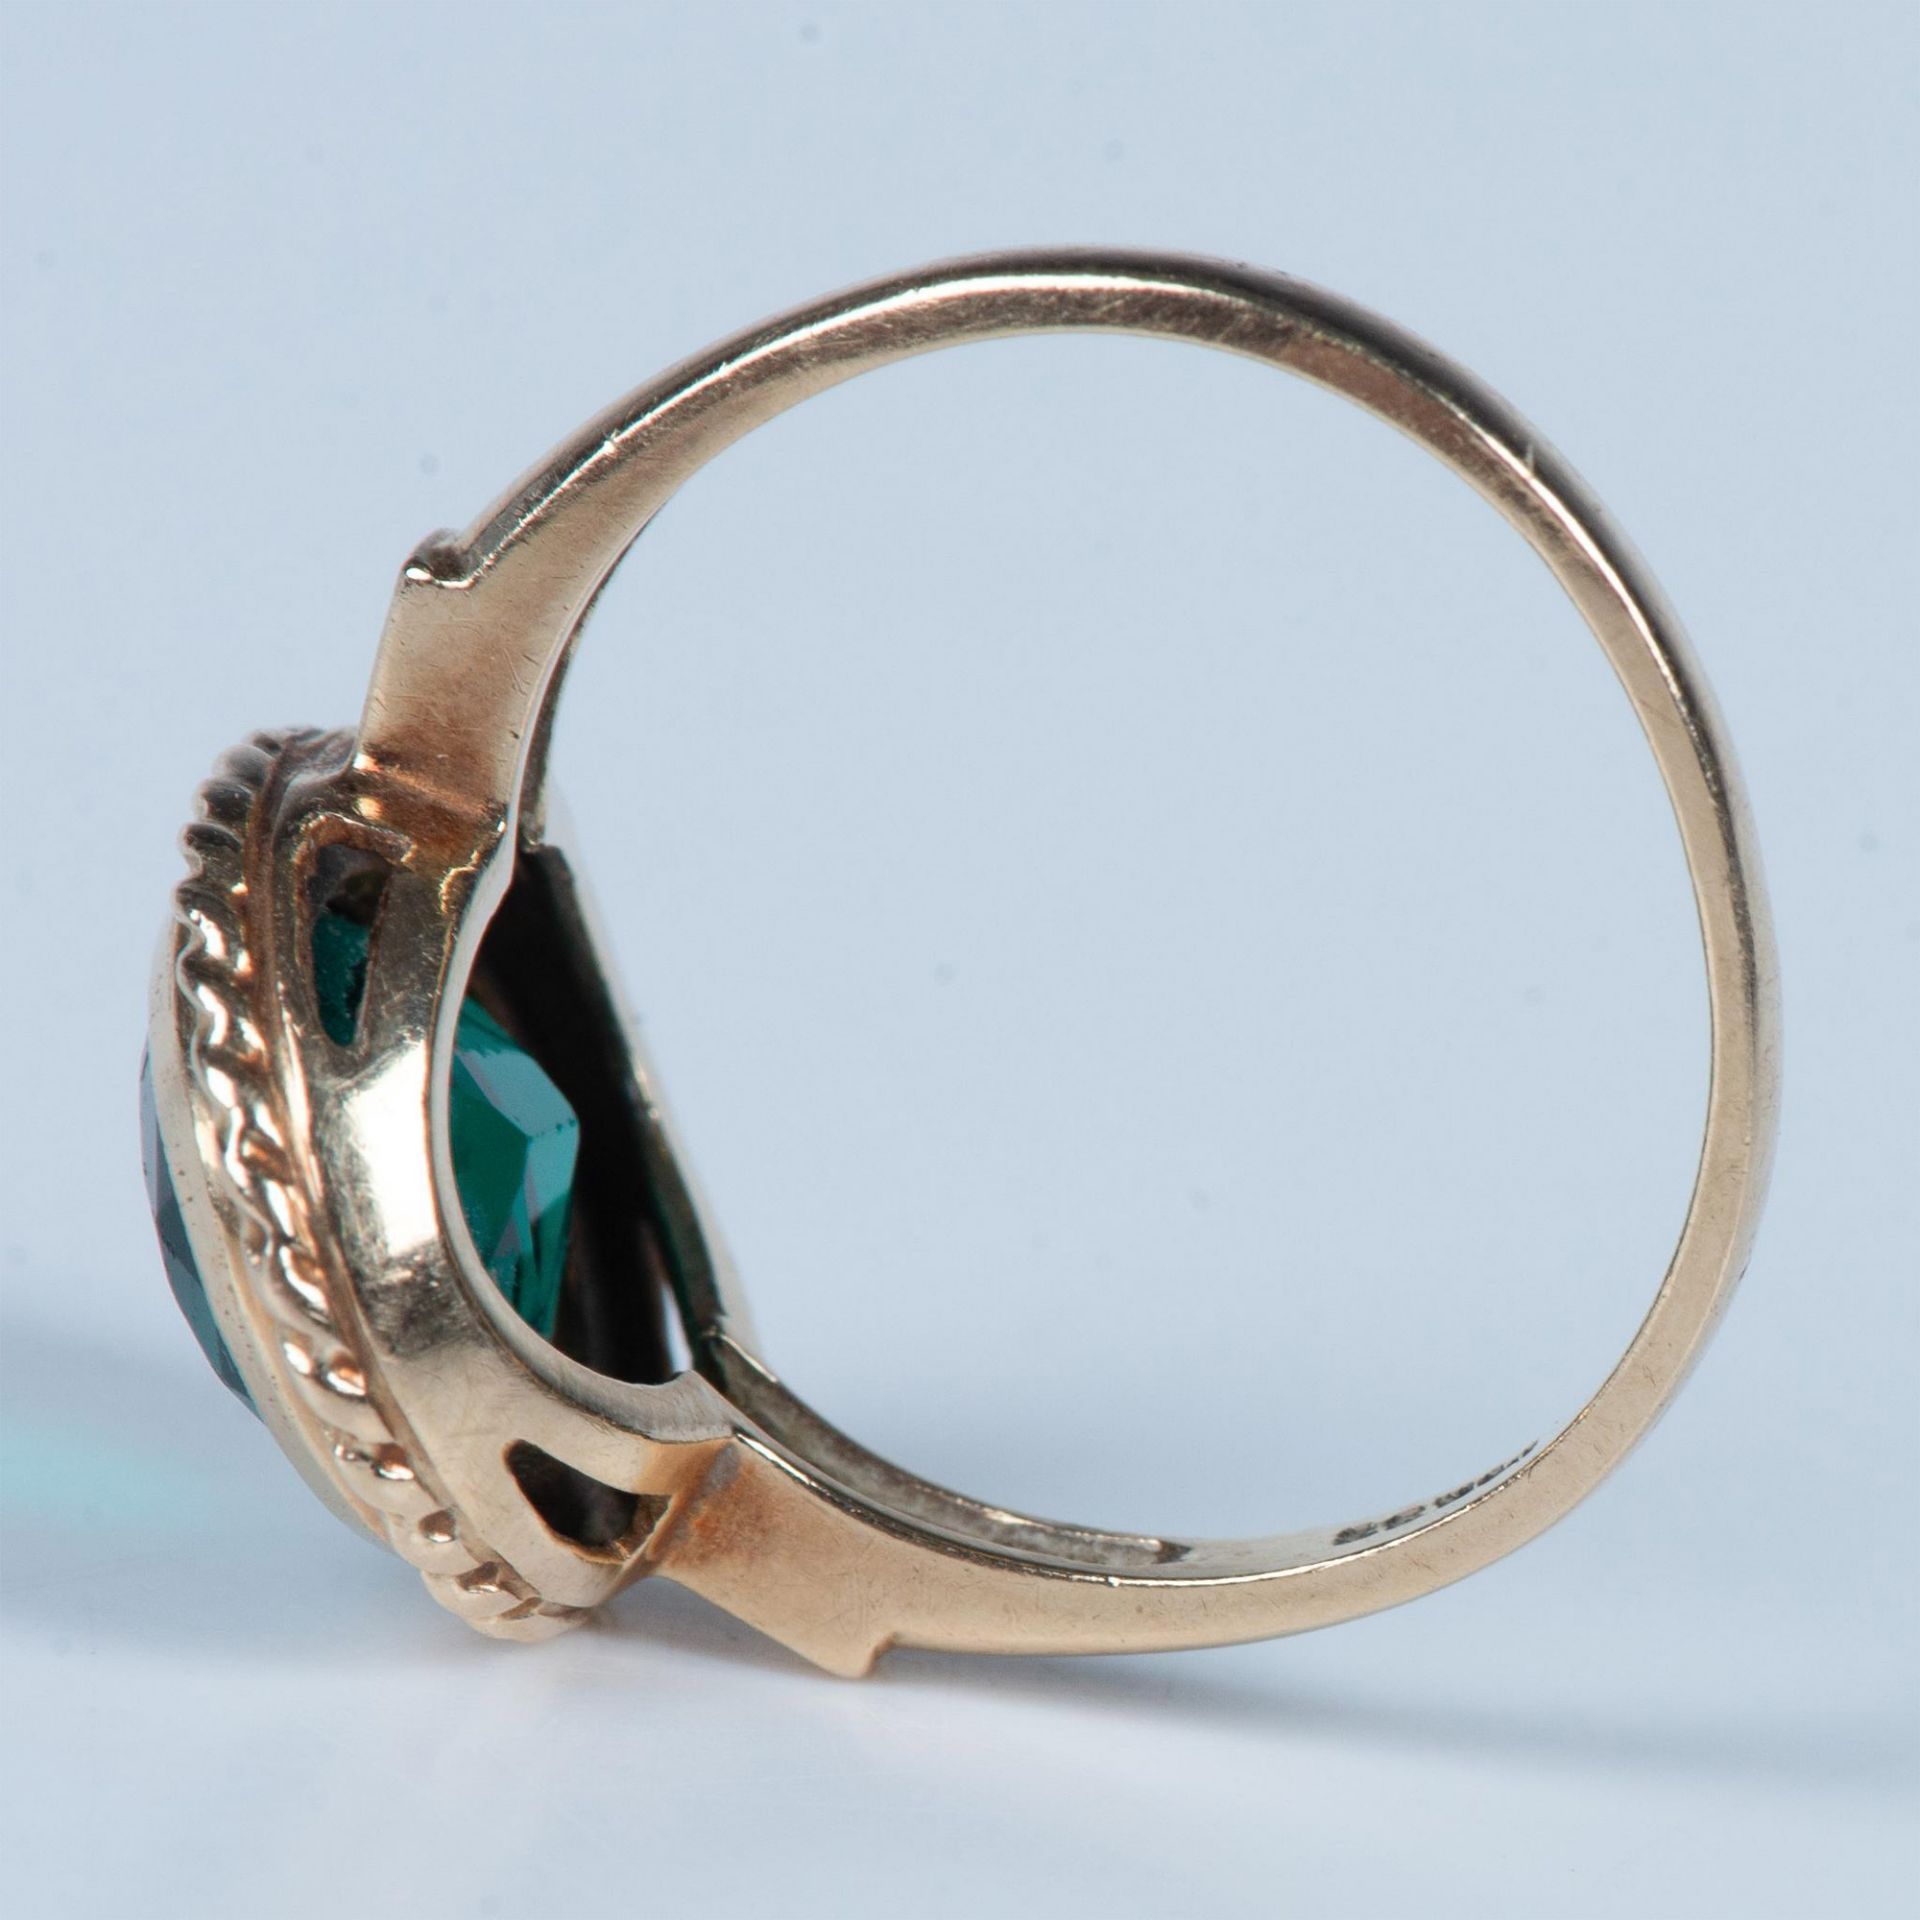 Gold Ring with Large Green Stone - Image 6 of 6